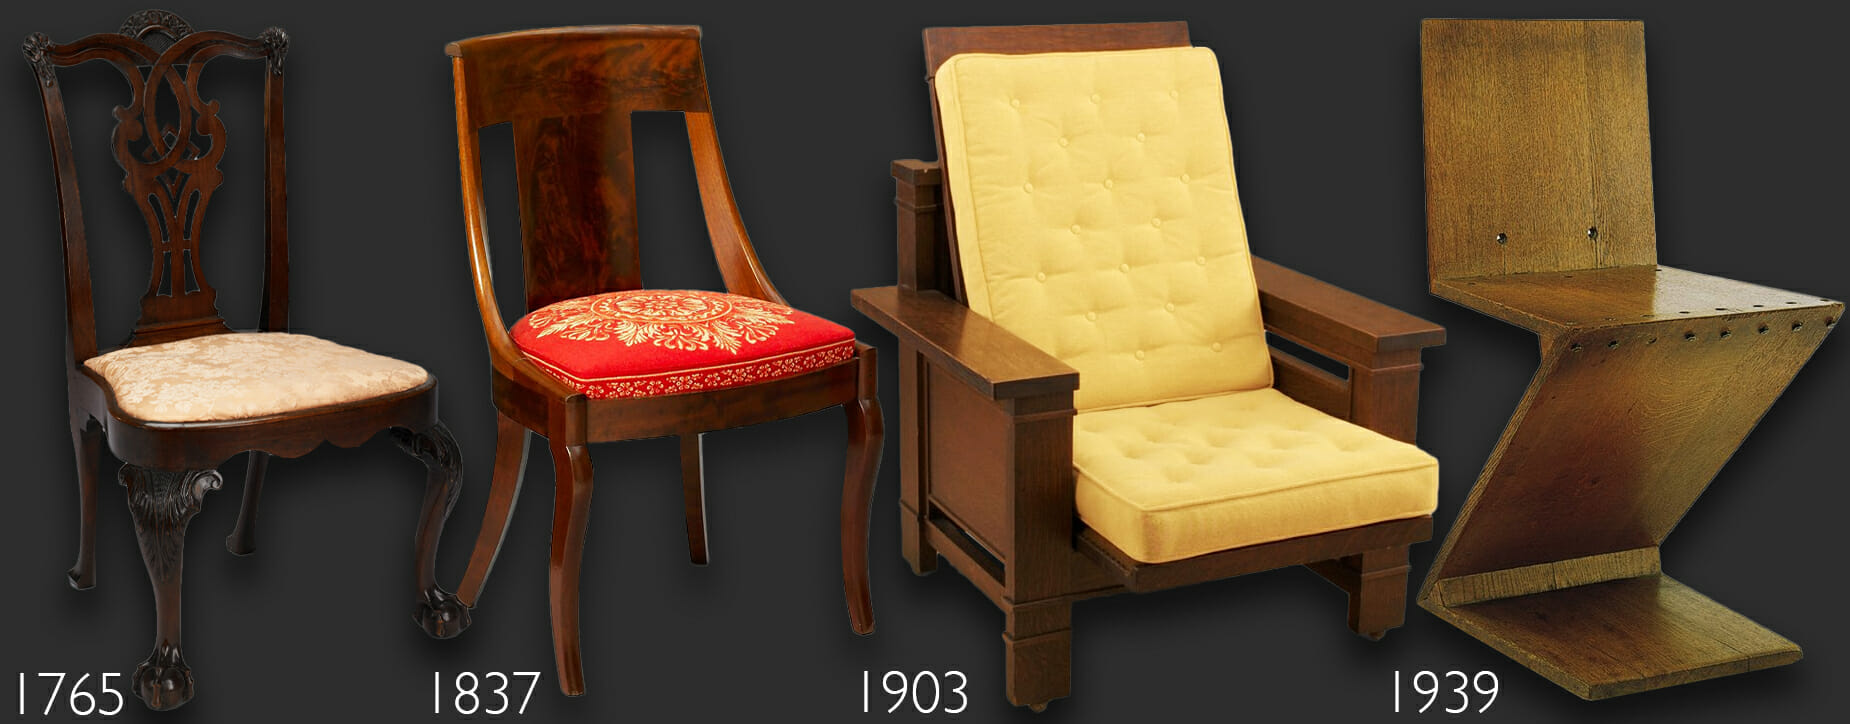 Chairs through time - how to identify antique furniture